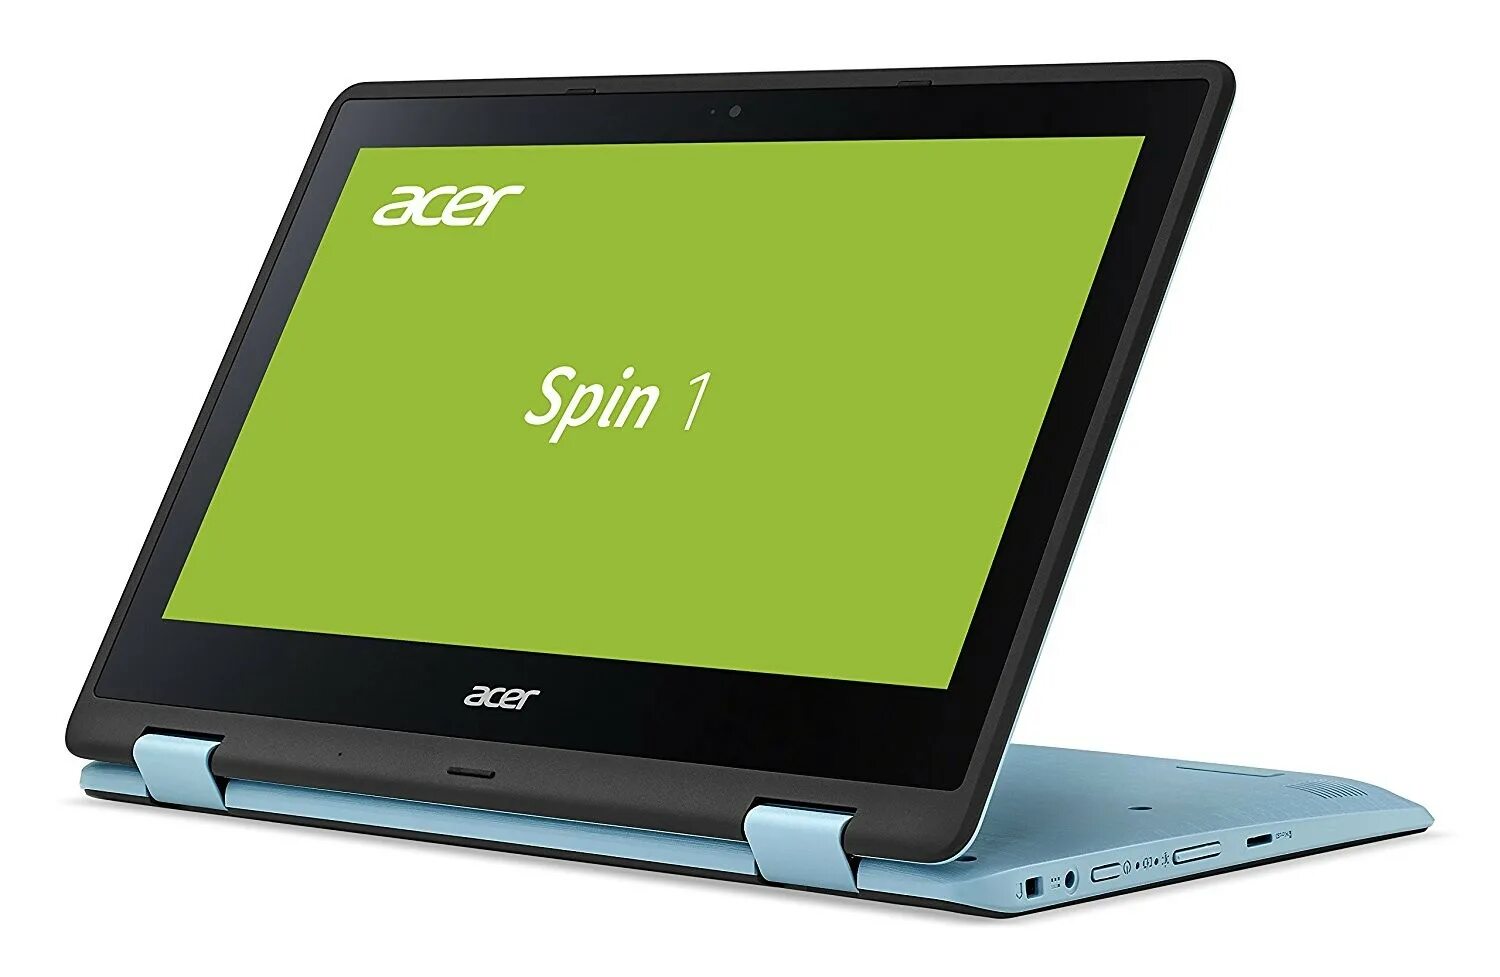 Acer Spin 1 sp111-32n. Асер спин 7. Acer Spin 1 SP 111-31. Асер ноутбук 10.1.